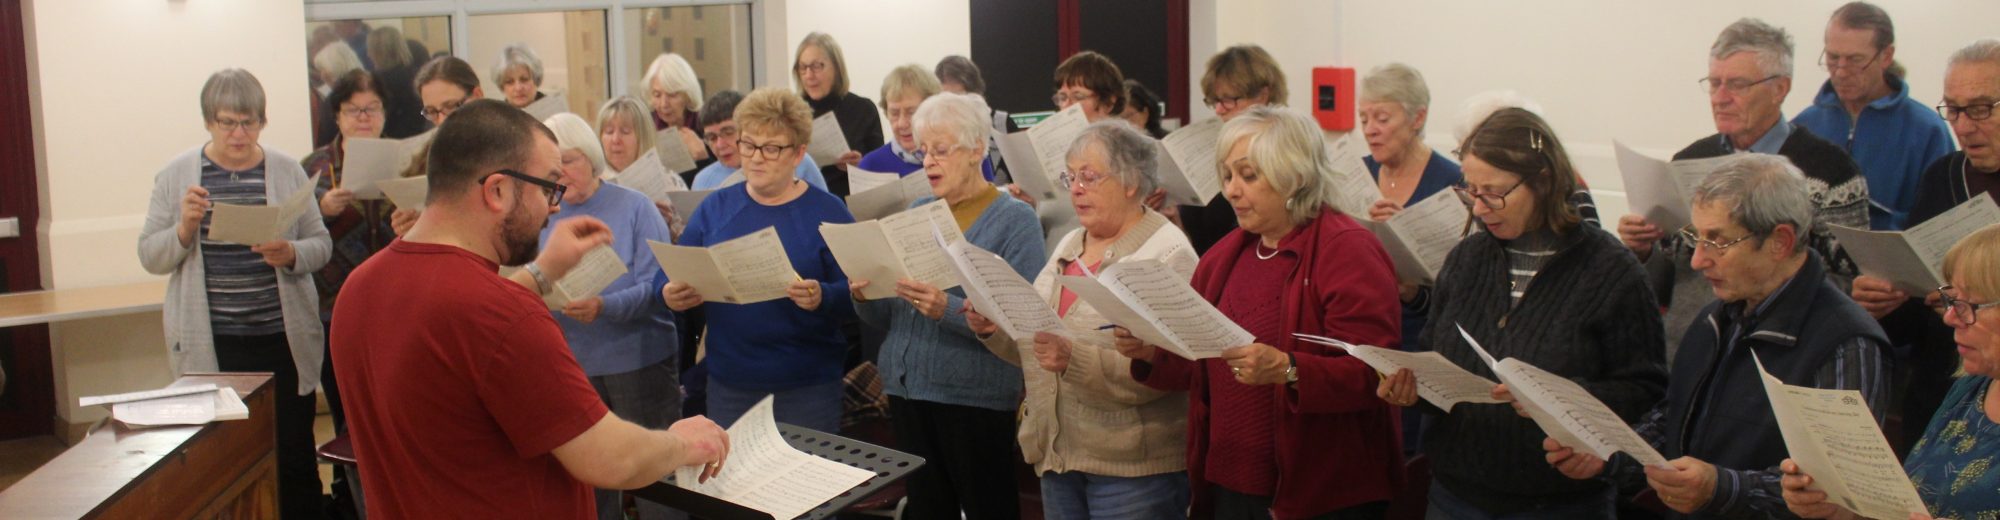 Stanmore Choral Society